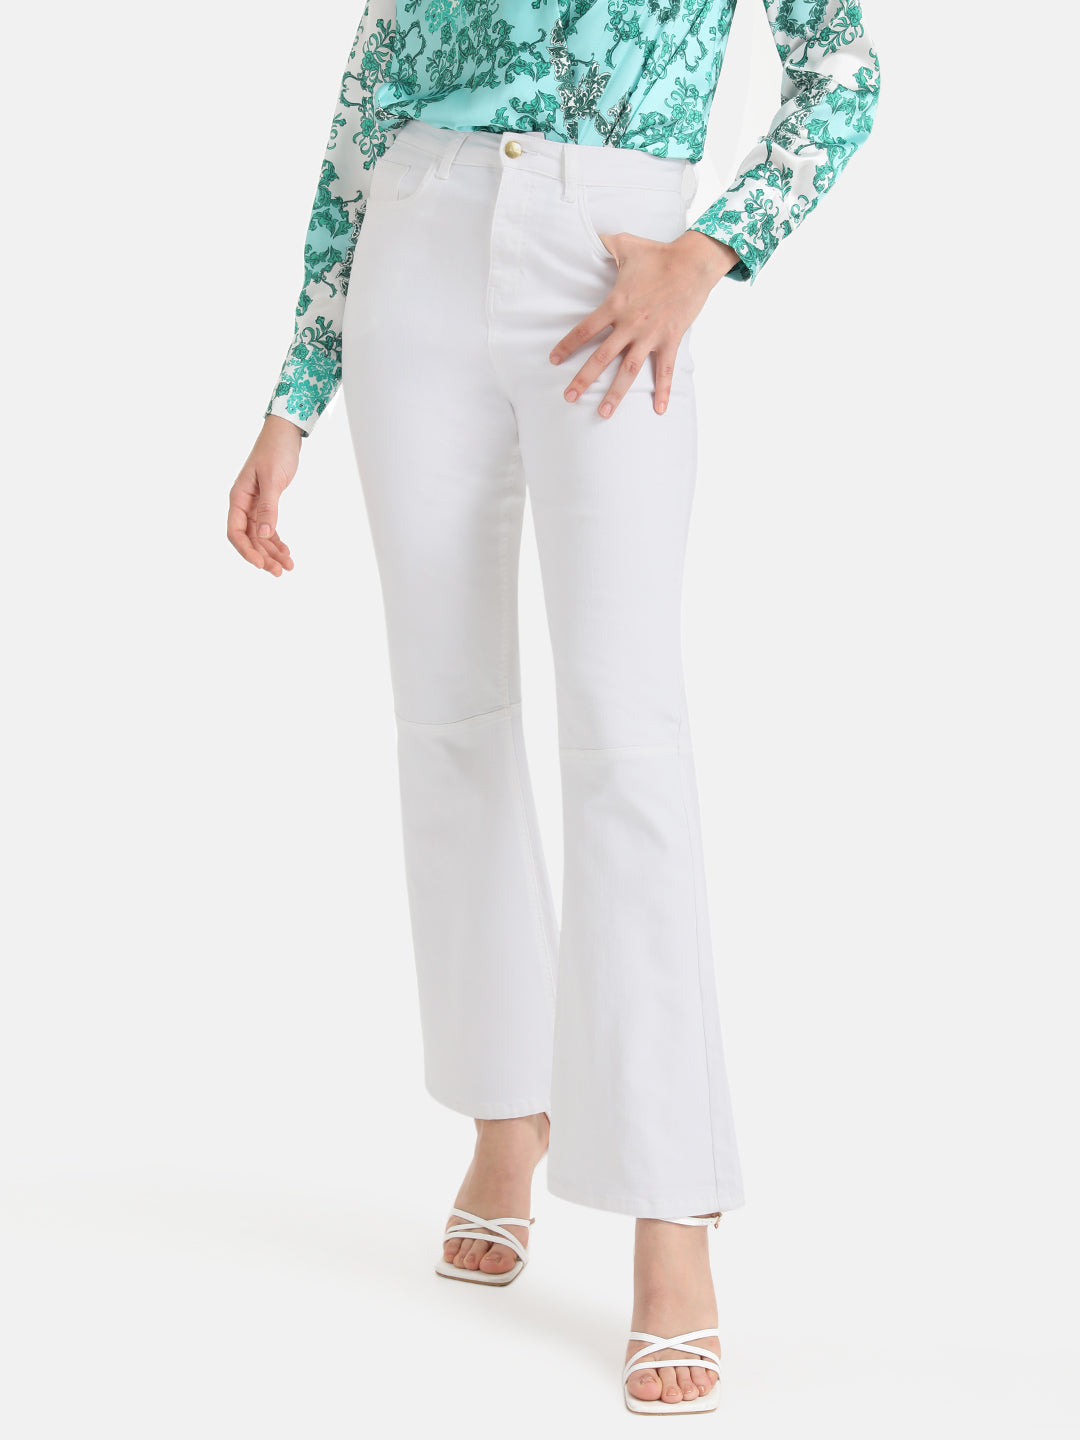 White Bell Bottom Pants | Upcycled Cotton Pants – REFASH